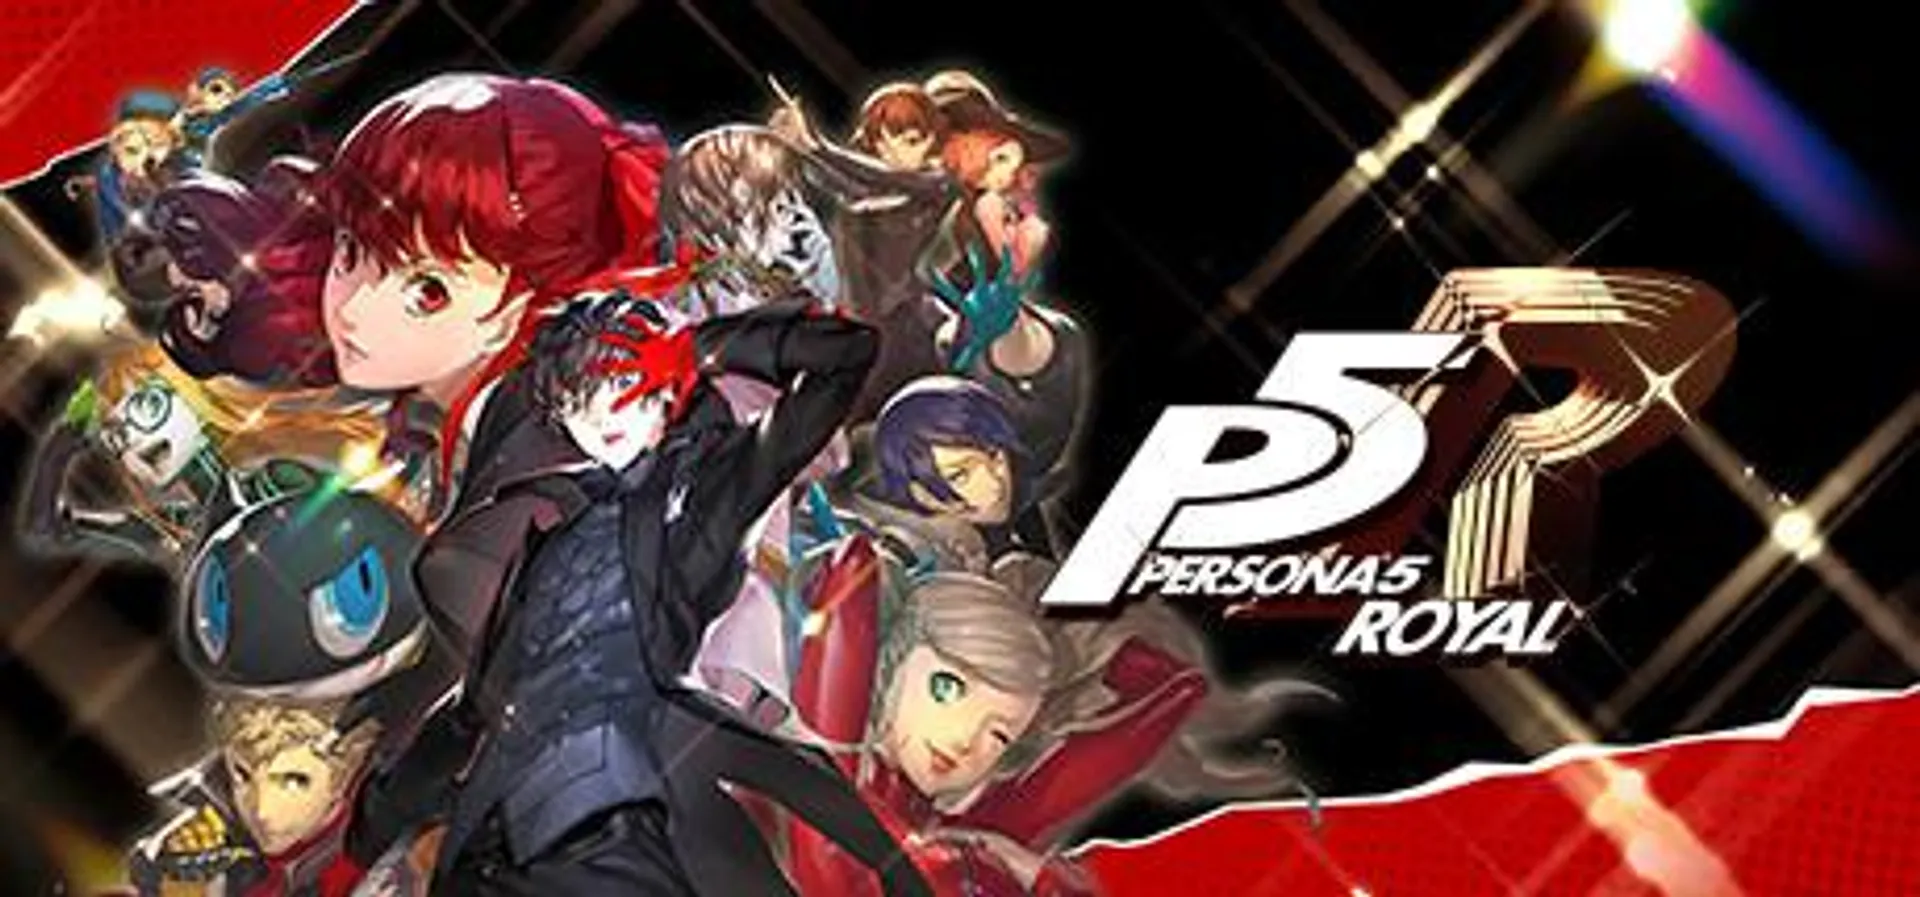 Save 30% on Persona 5 Royal on Steam